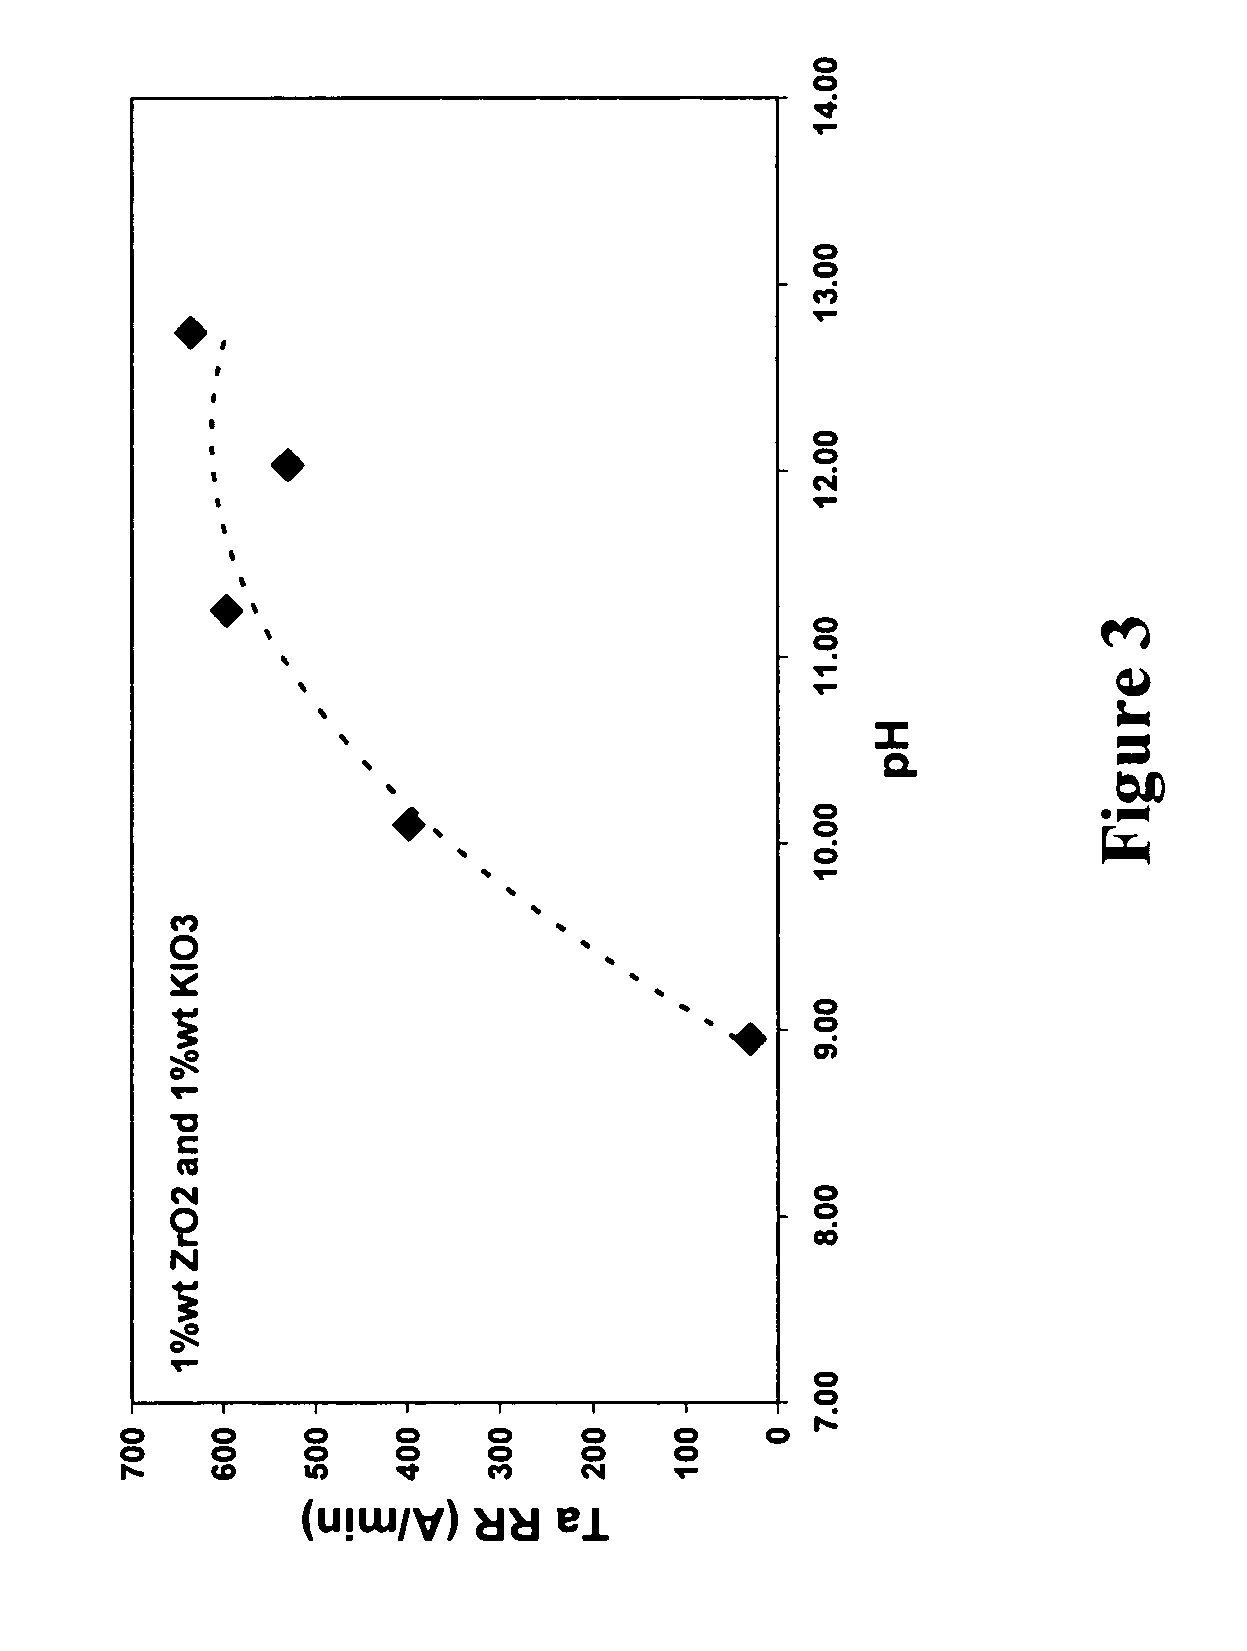 Tantalum CMP compositions and methods